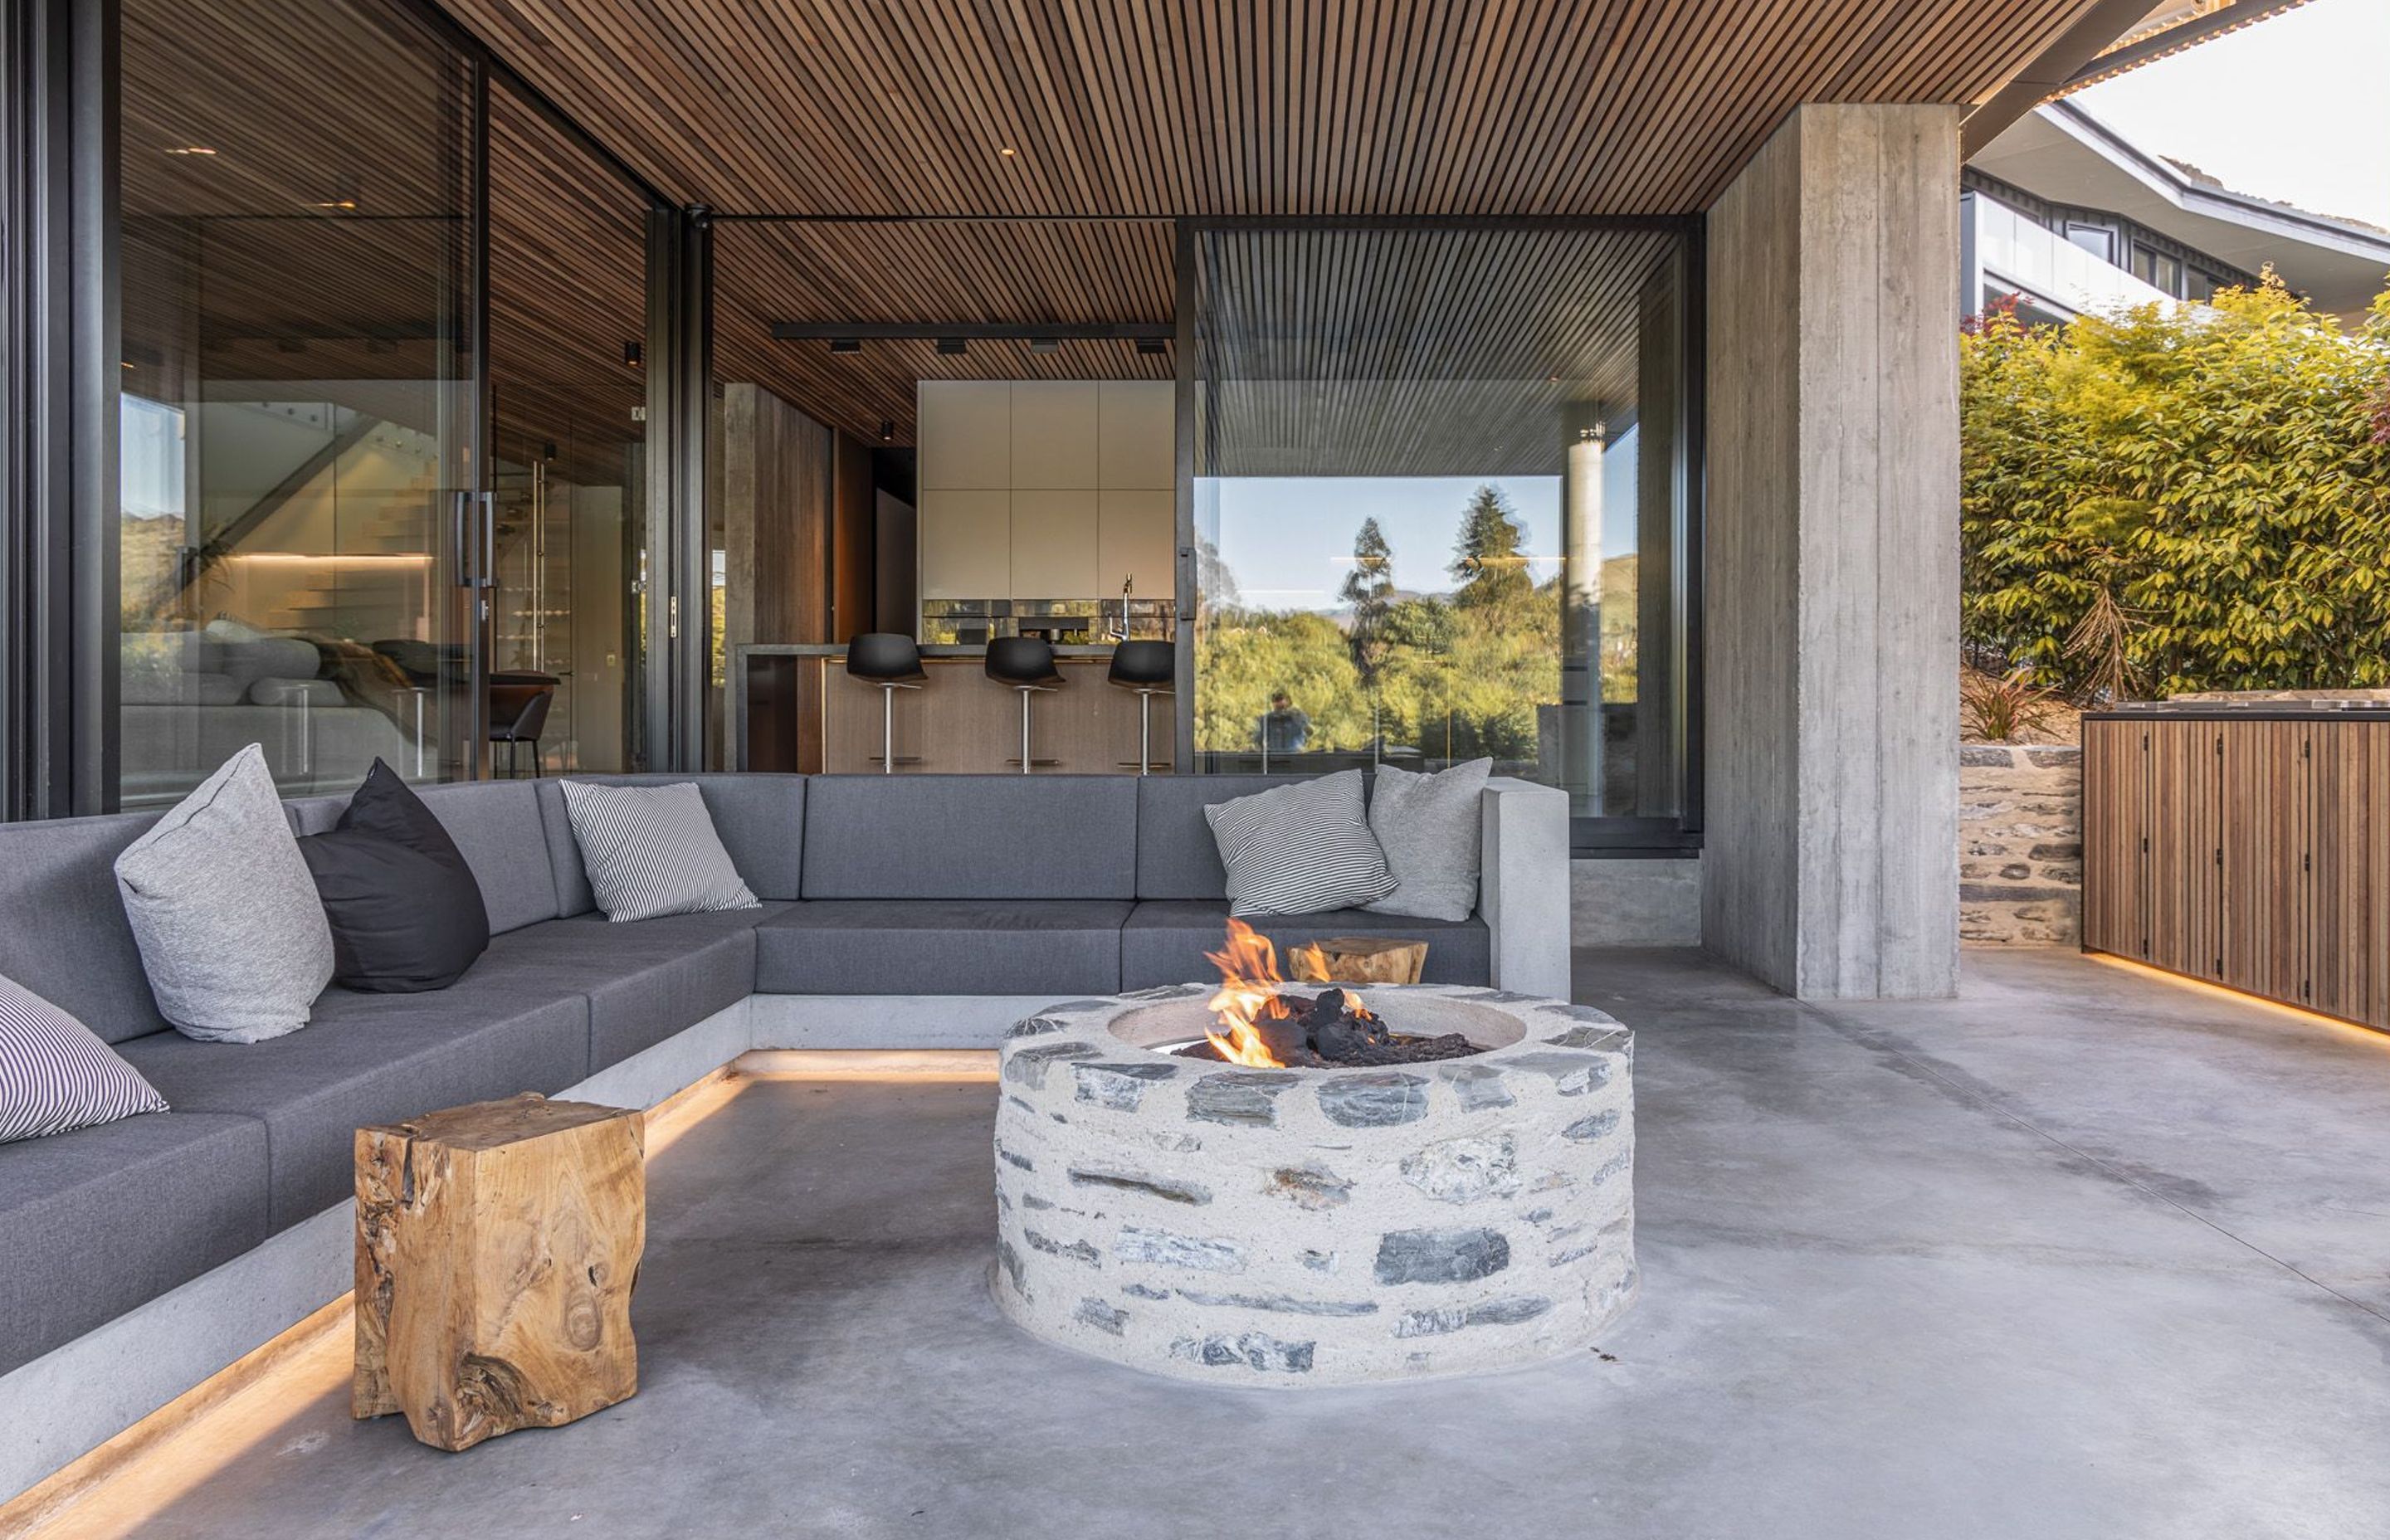 Underneath the cantilevered roof, the sheltered outdoor room features built-in furniture and a schist fire pit.